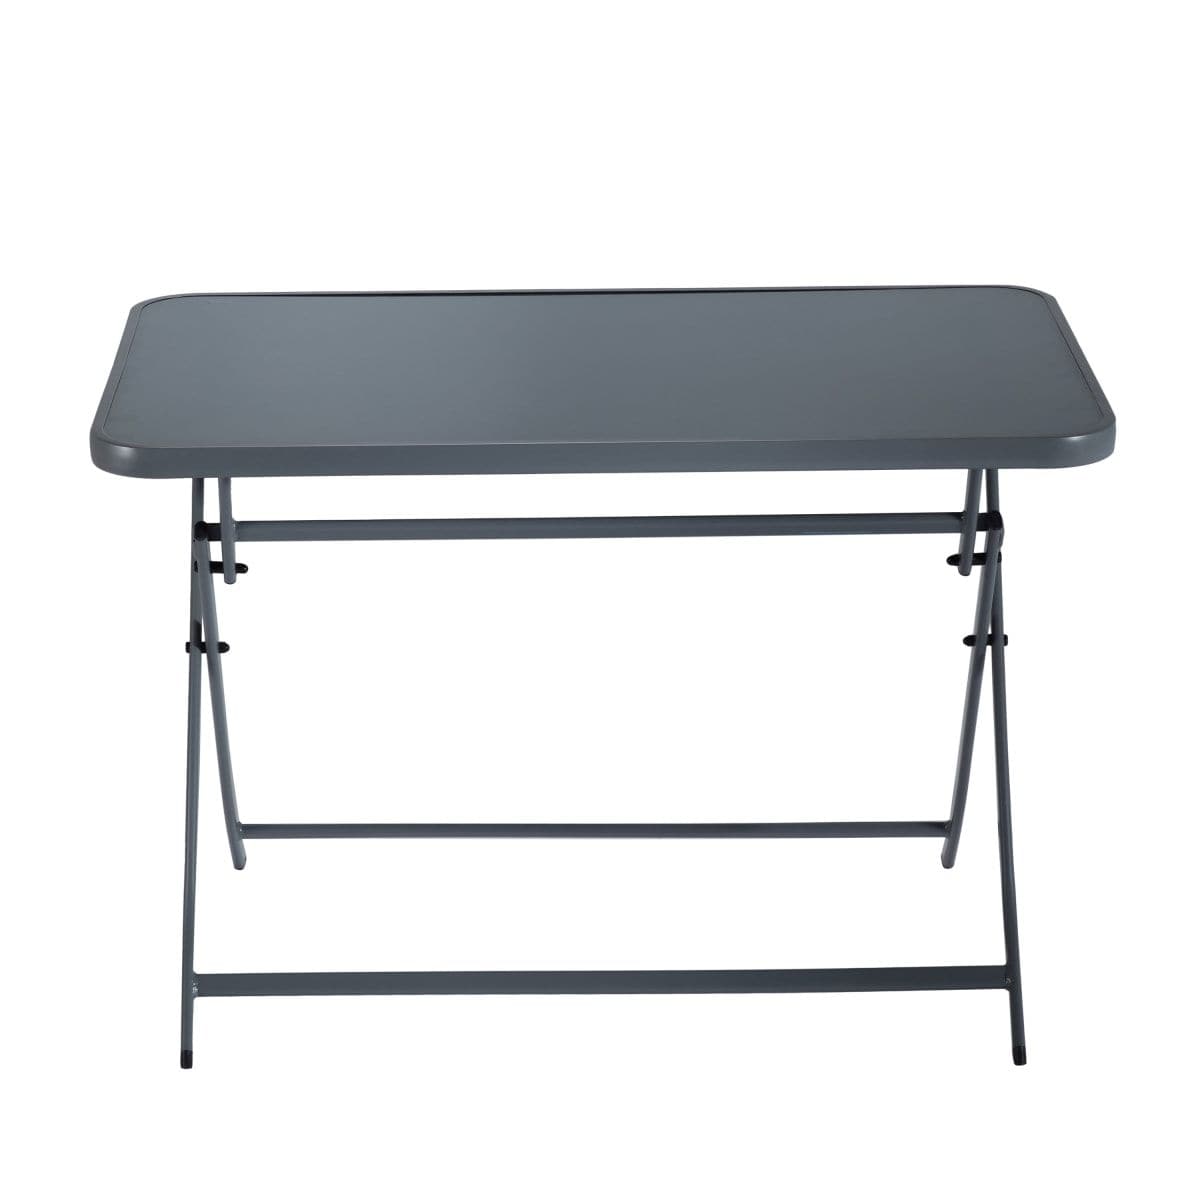 EMYS NATERAL - Folding Table - 4 seater - rectangular steel top glass - 70x110xh72 - best price from Maltashopper.com BR500009517